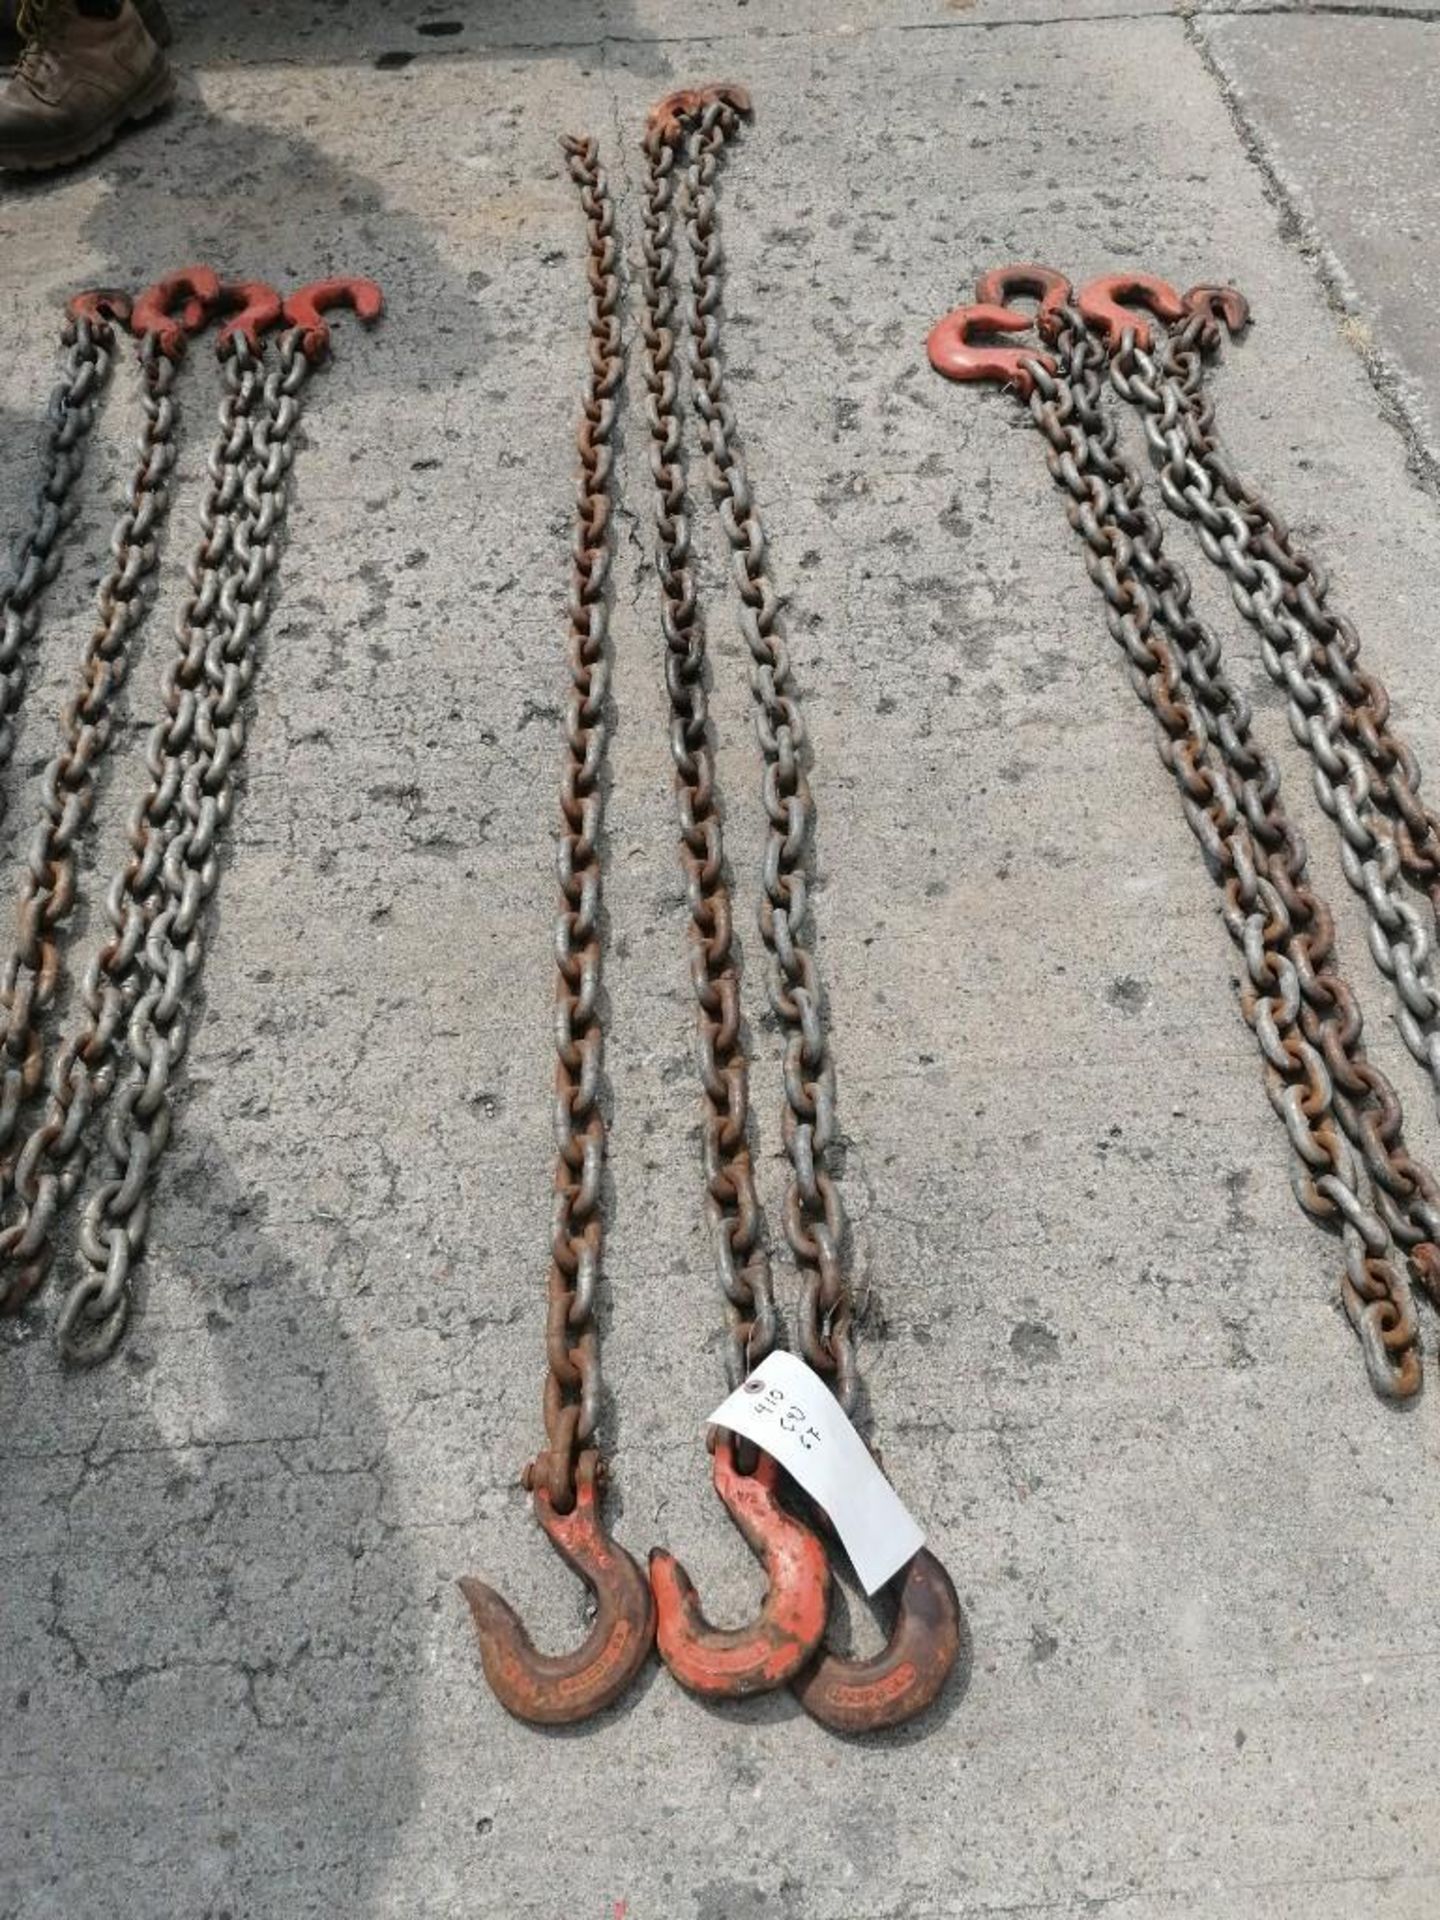 (3) 1/2" USA 6' Chain with hook. Located at 301 E Henry Street, Mt. Pleasant, IA 52641.